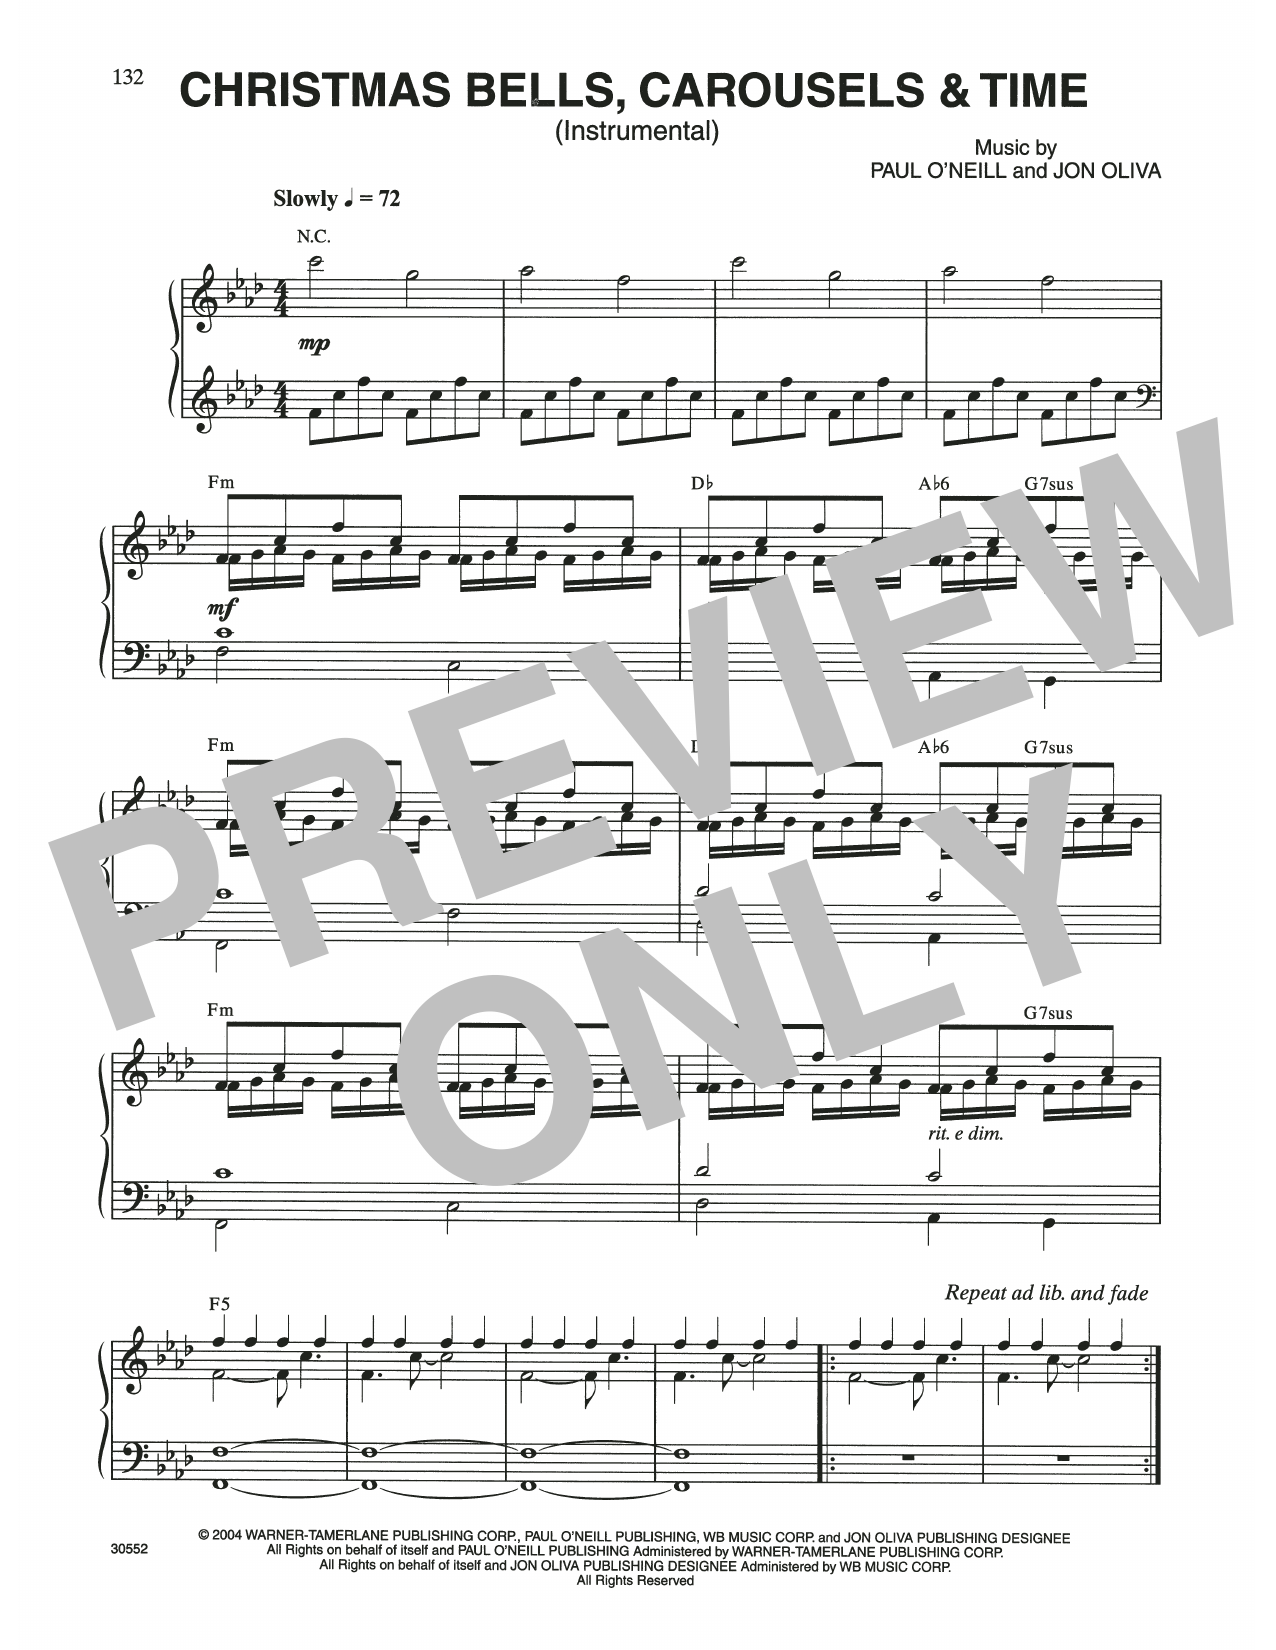 Download Trans-Siberian Orchestra Christmas Bells, Carousels & Time Sheet Music